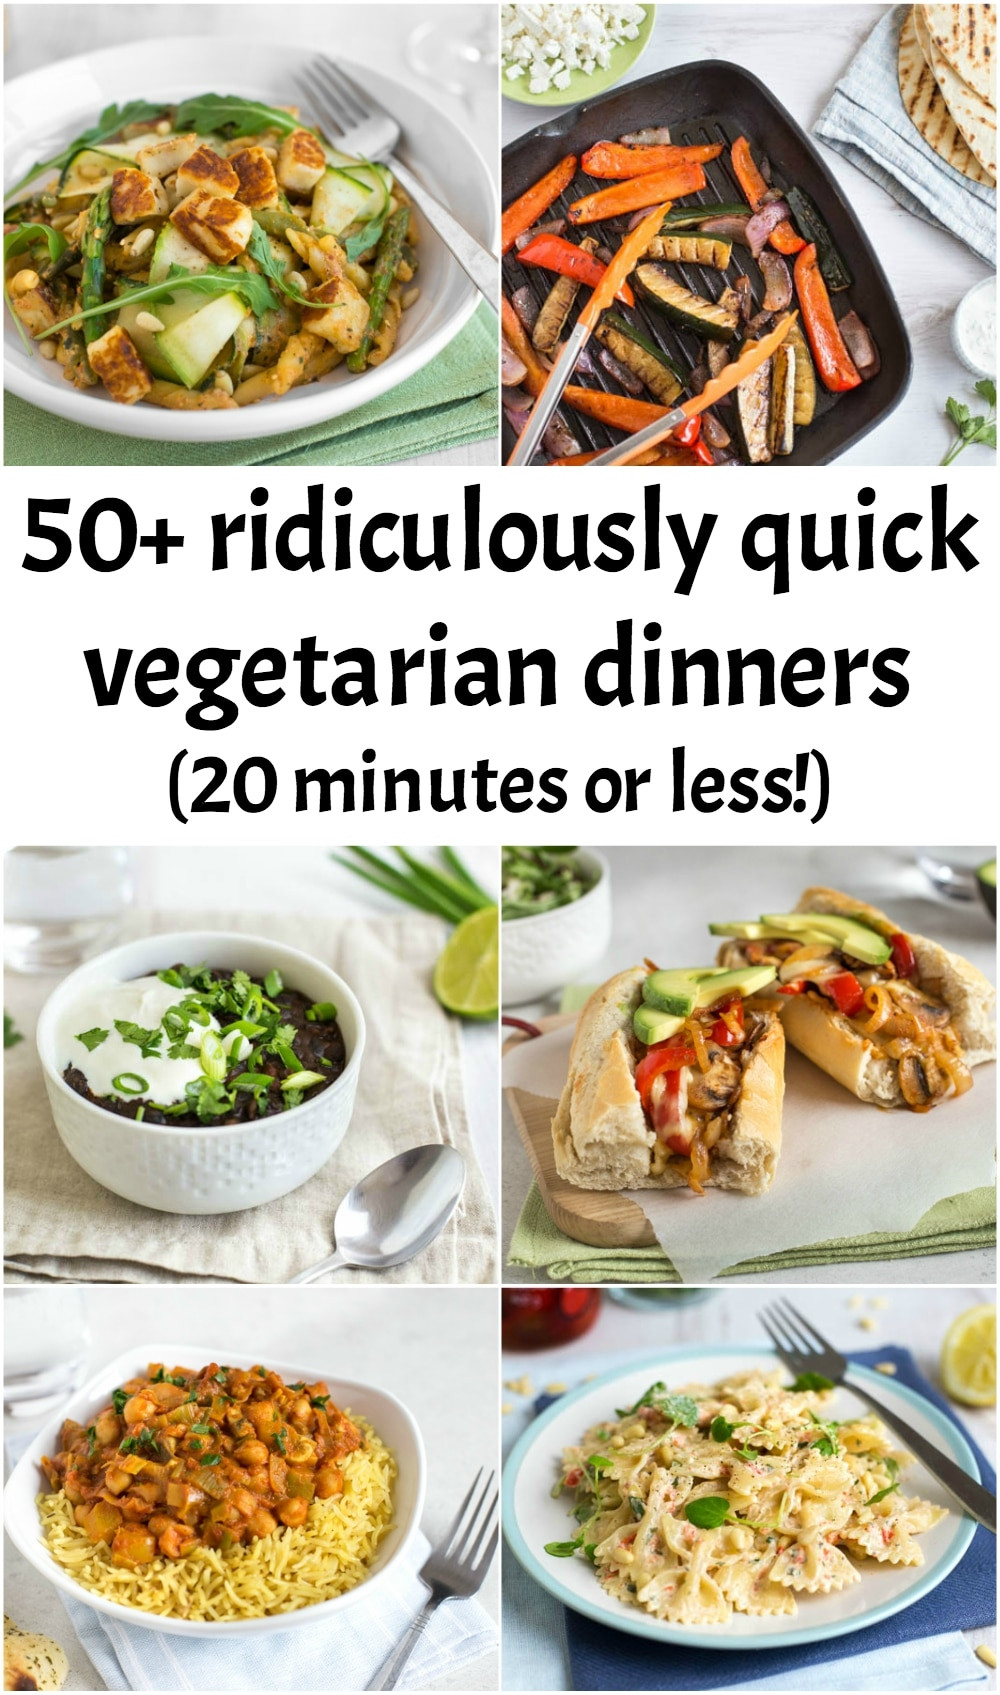 Easy Vegetarian Dinners
 50 ridiculously quick ve arian dinners 20 minutes or